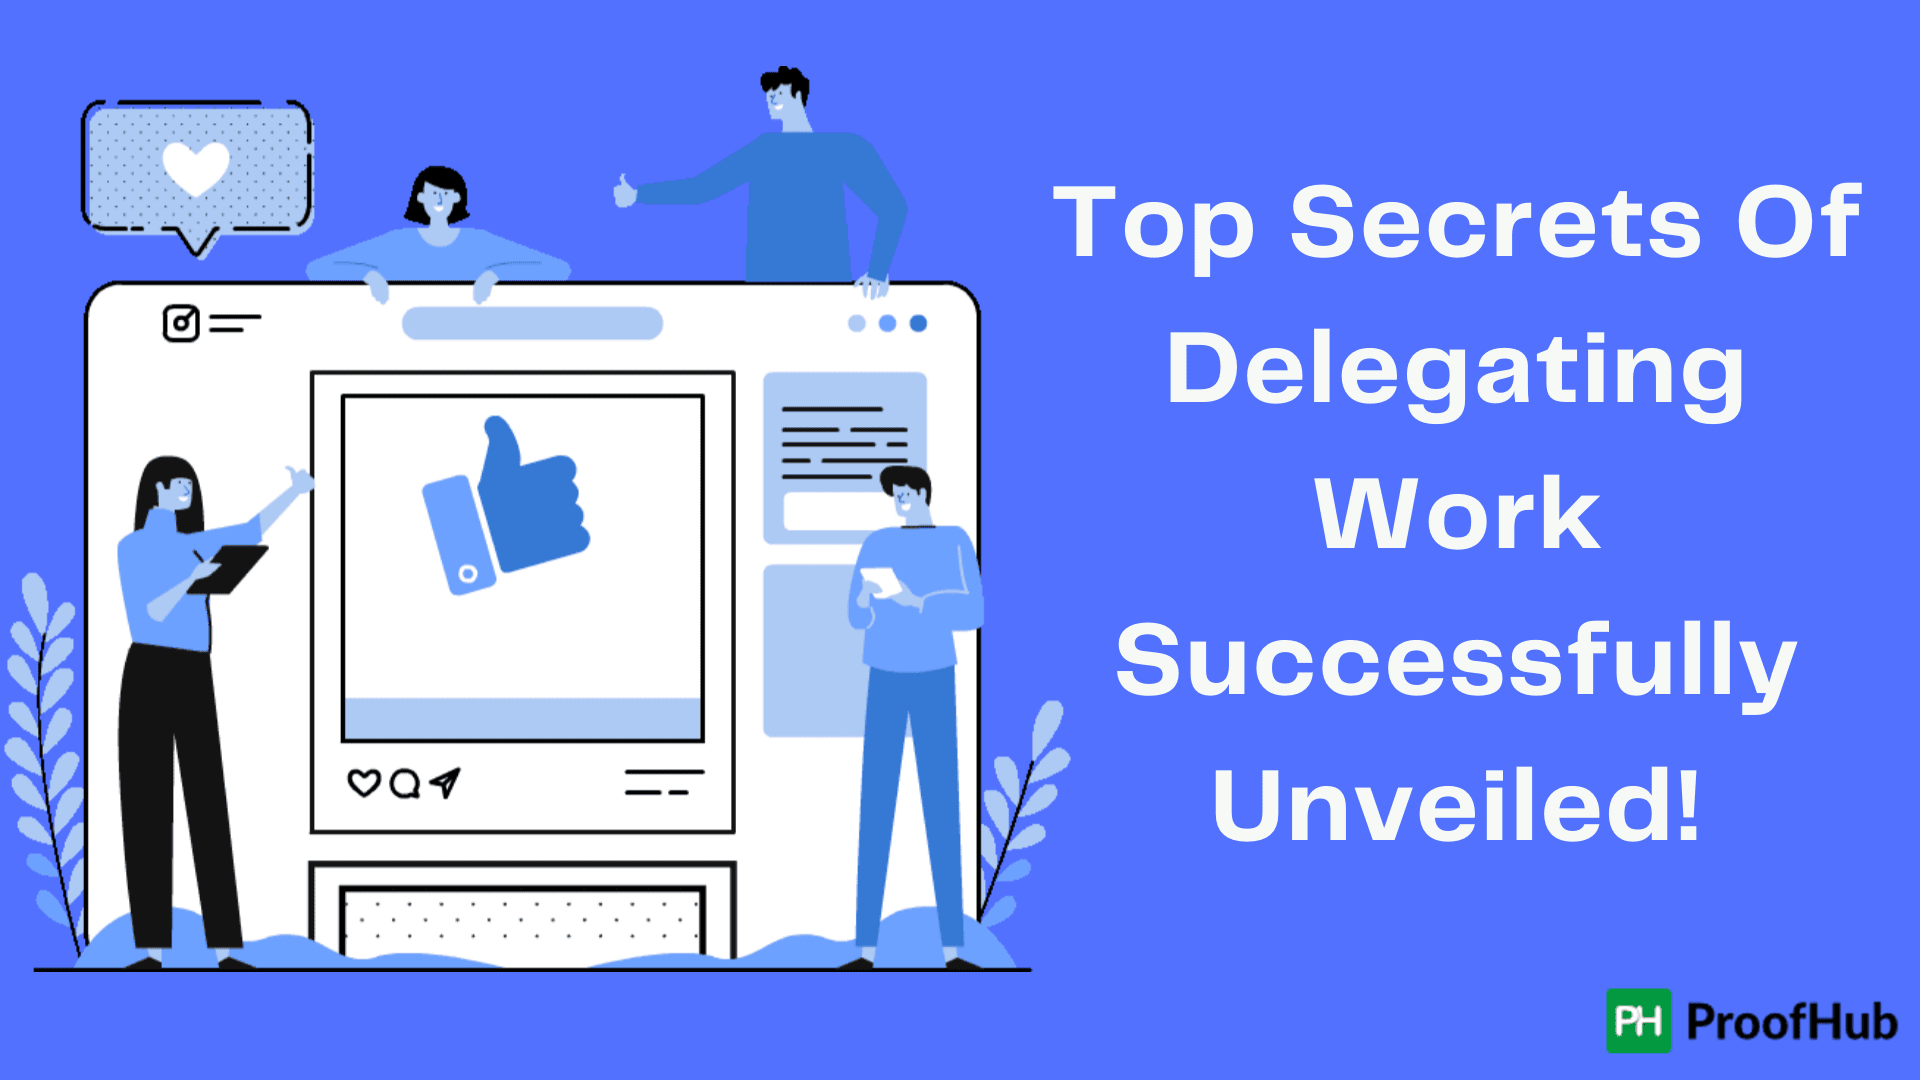 Delegating Work Can Be Easy With These Tried And Tested Tips